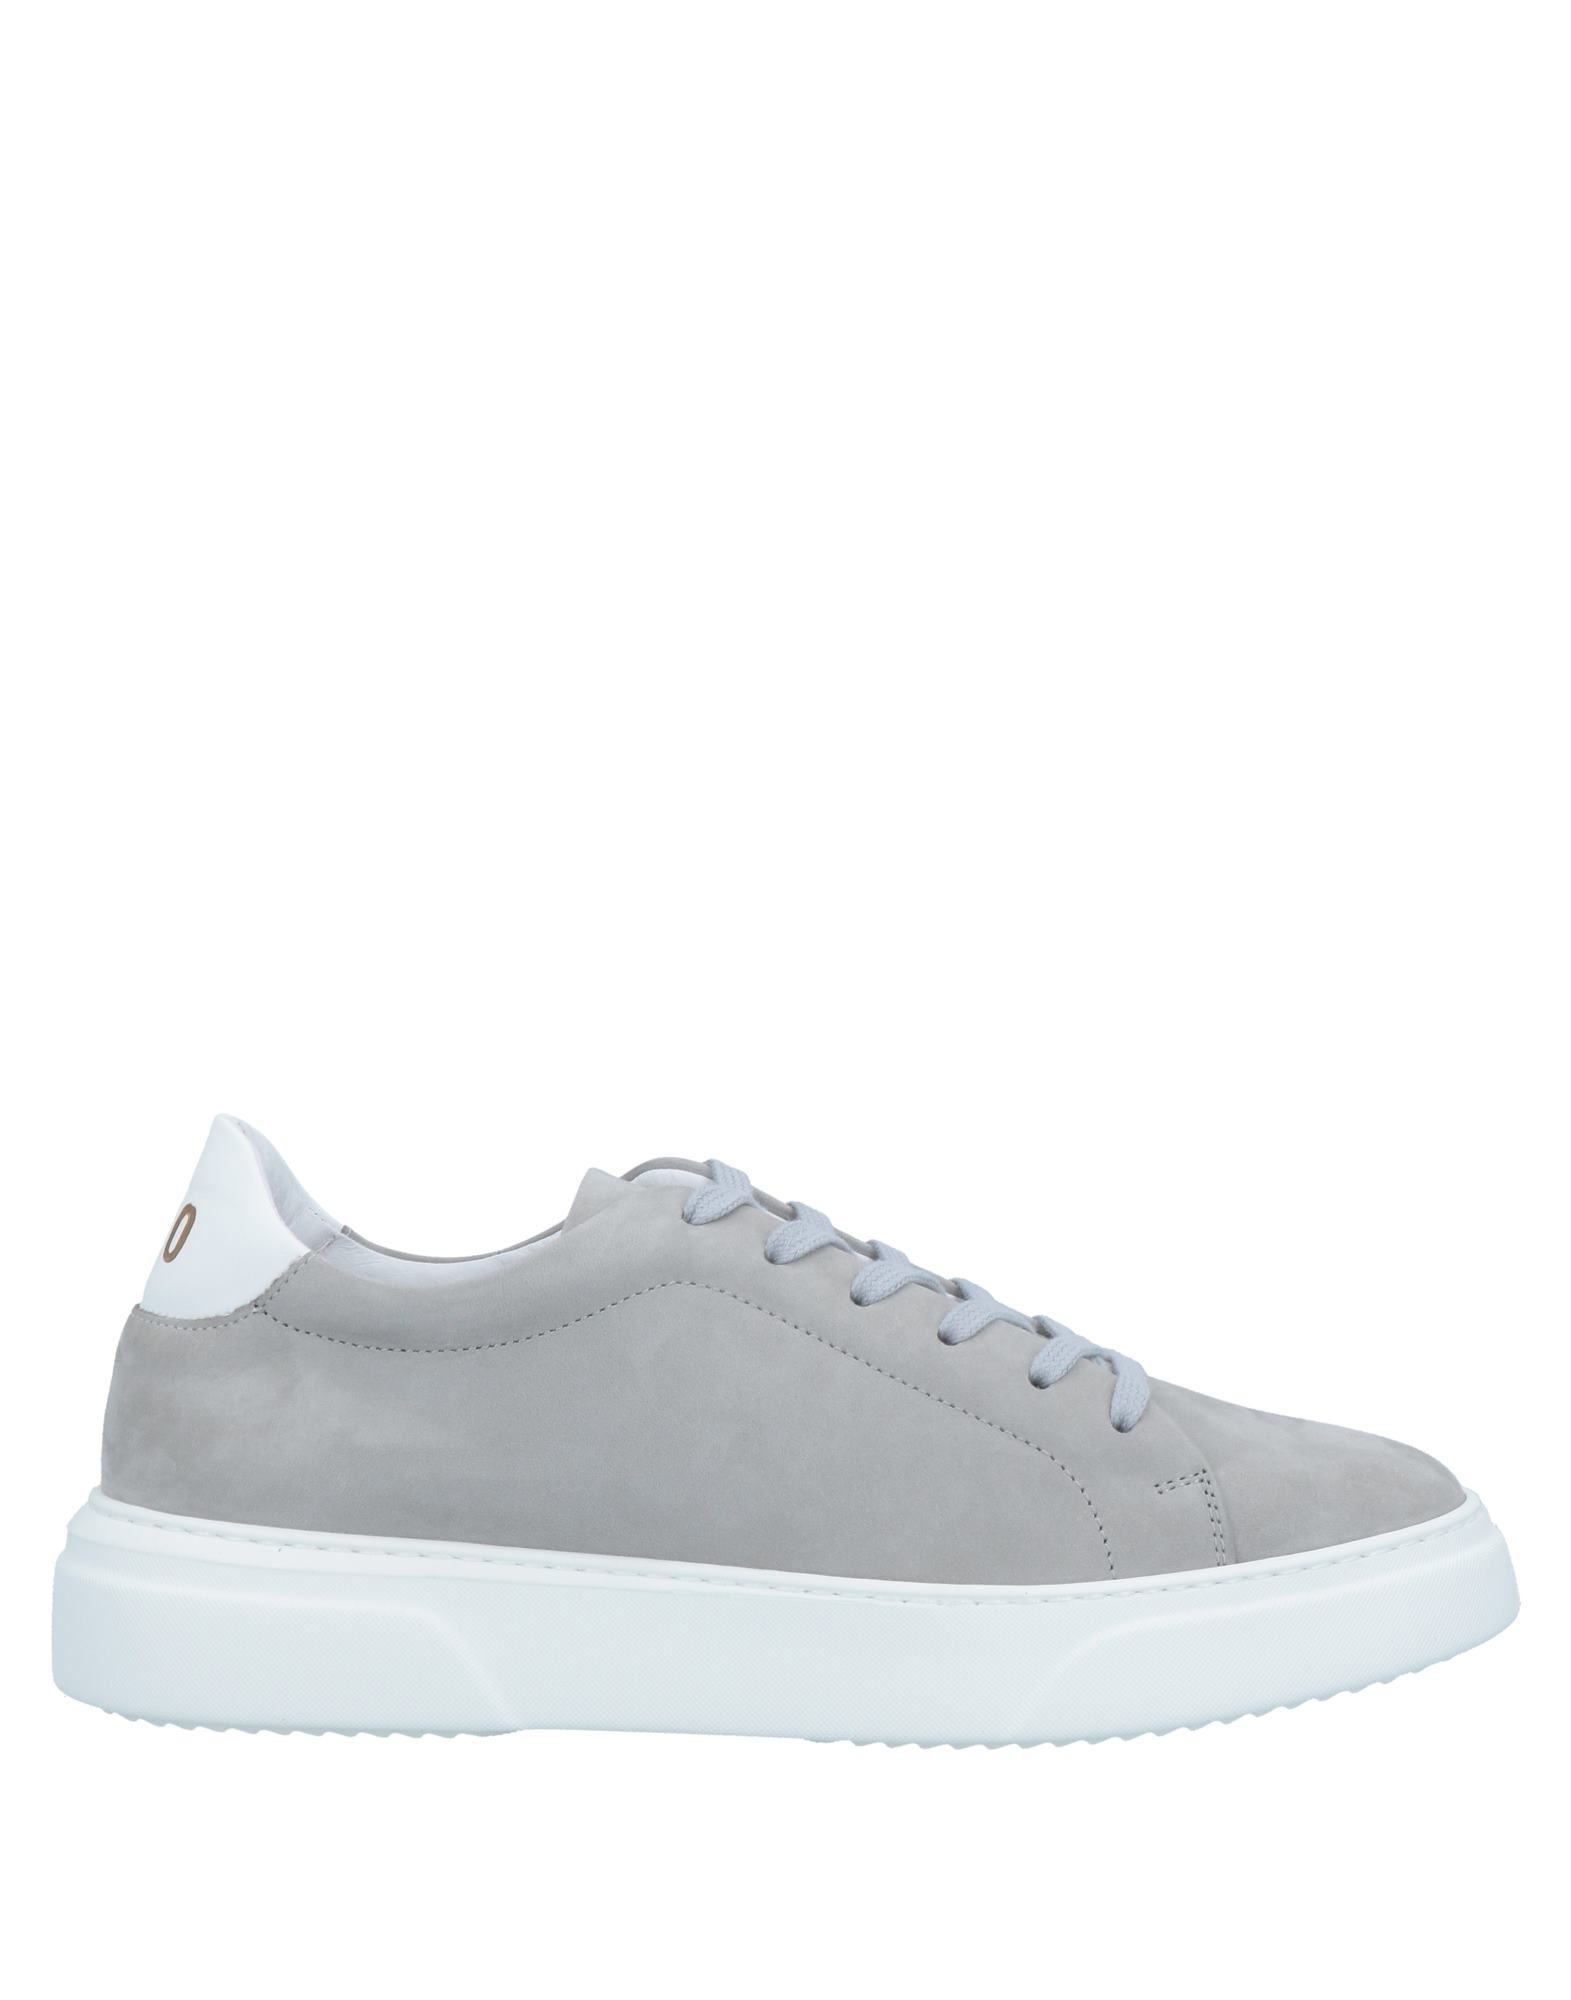 Pantofola D'oro Sneakers In Light Grey